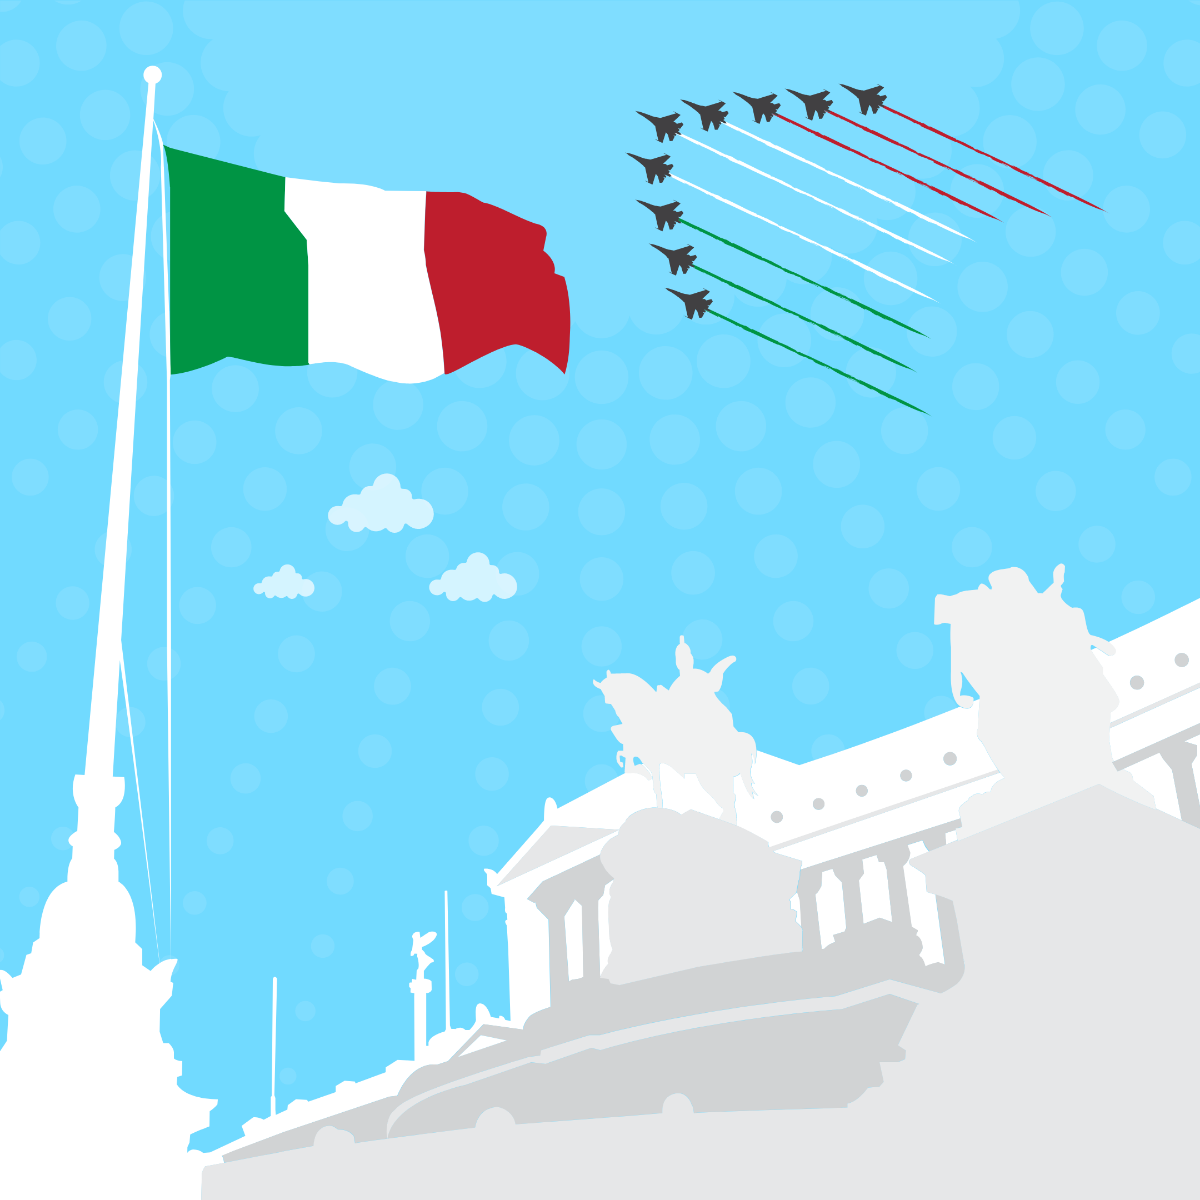 Italy Liberation Day Image Template